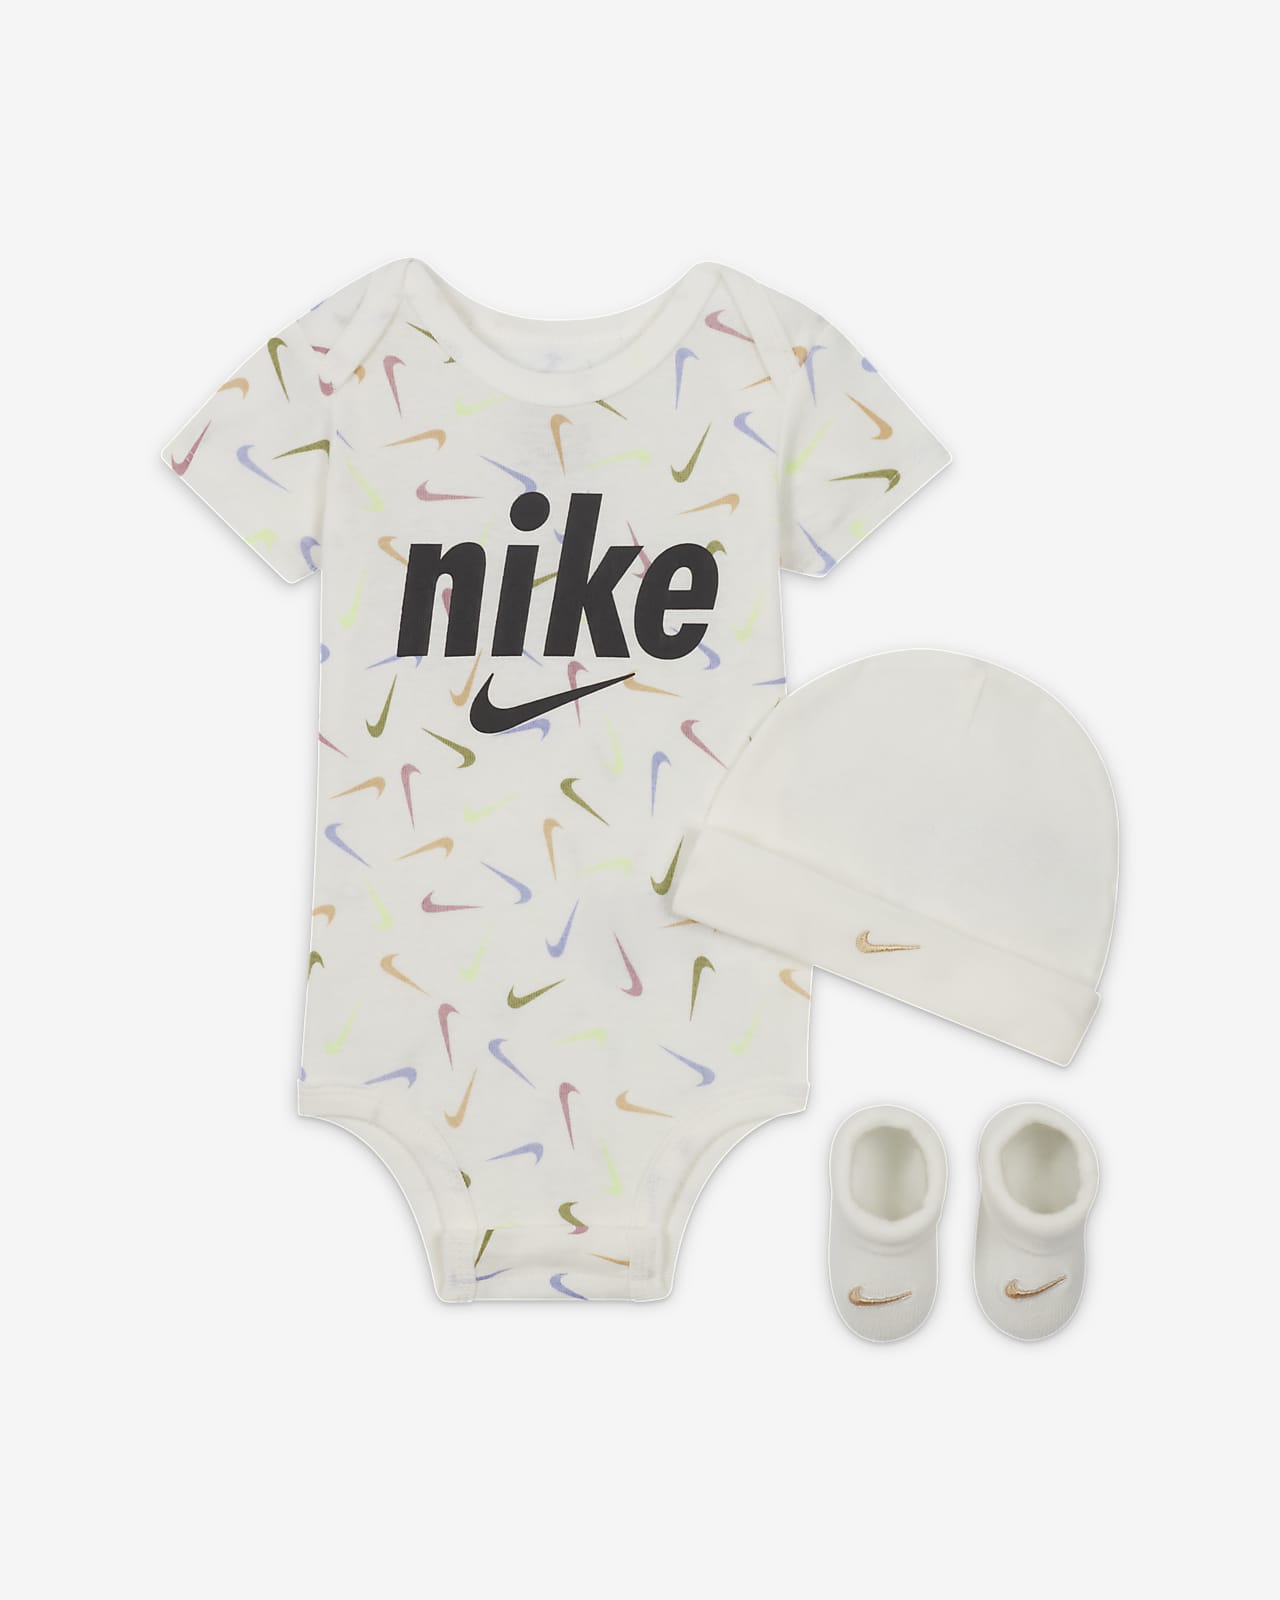 Nike Everyone From Day One 3-Piece Box Set Baby Set